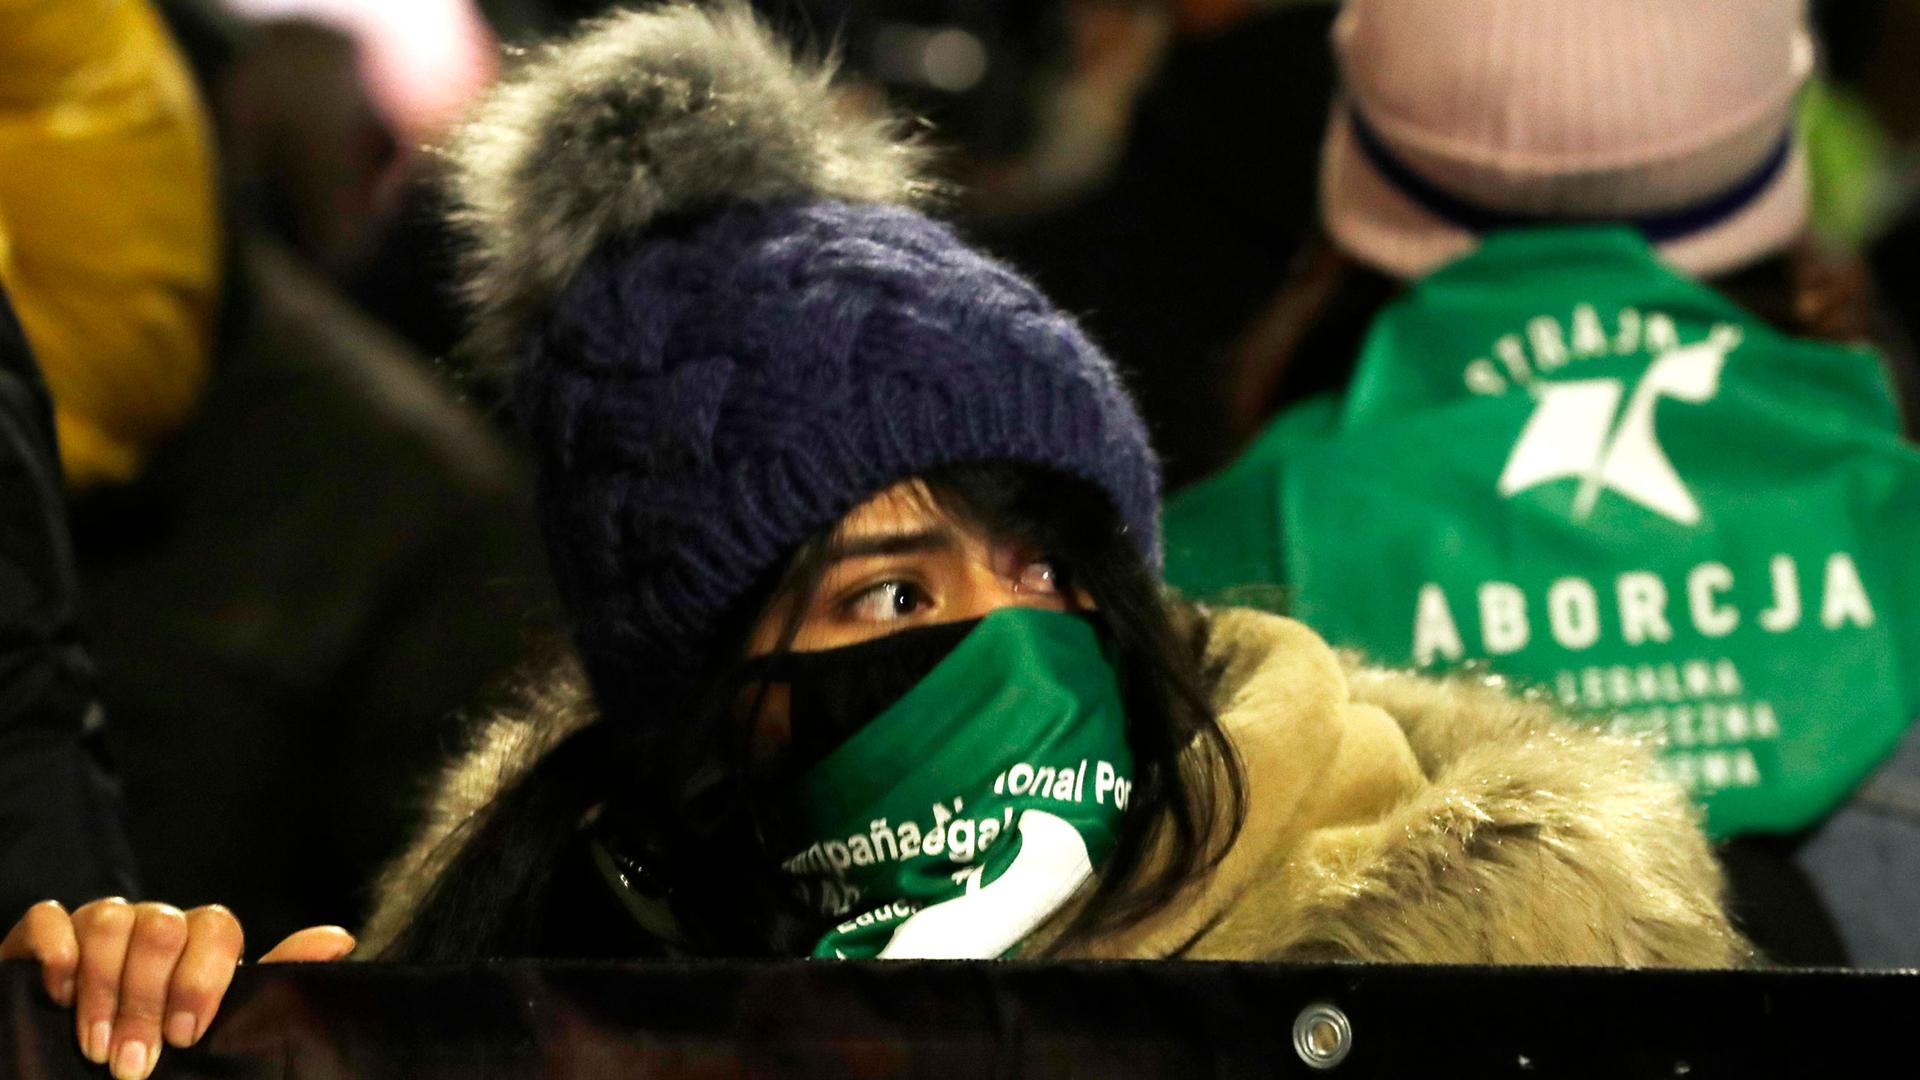 A crowd of people are shown with a woman in the center holding a banner and wearing a winter hat and green scarf with writing on it.